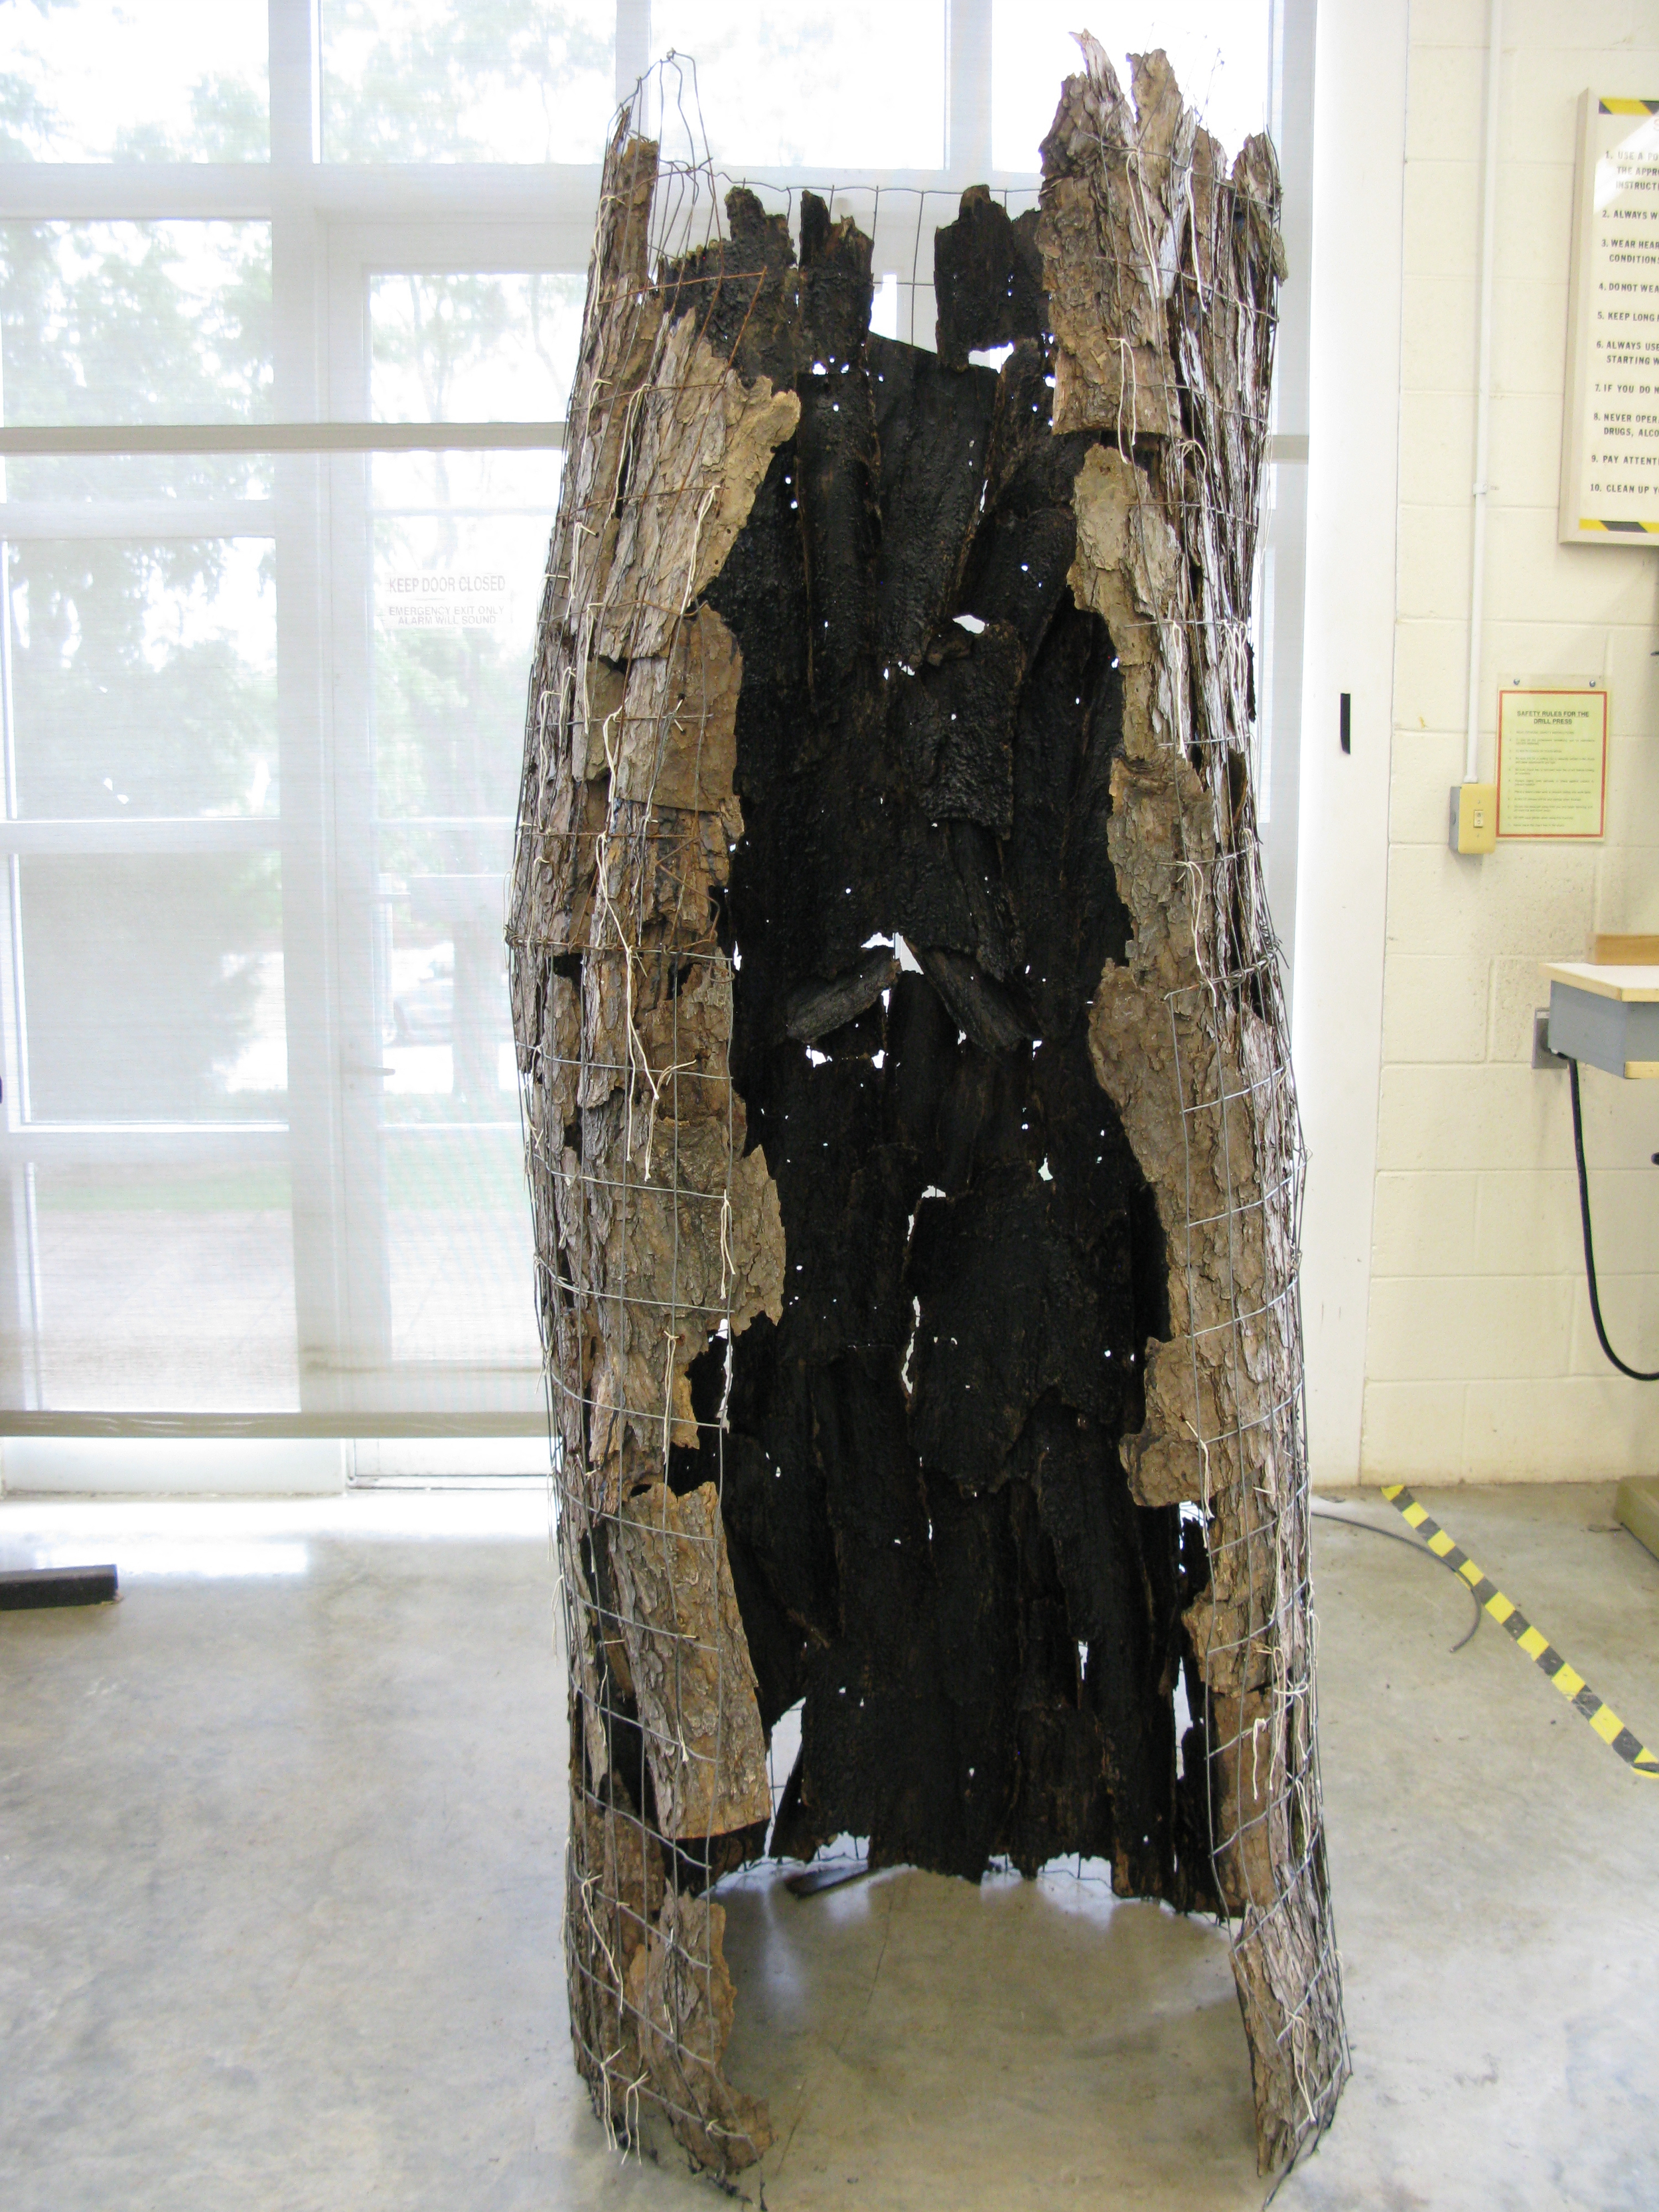  Untitled  pine bark, beeswax, char, wire mesh frame, cotton twine  7ft. h. x 3ft. diam.  2012 